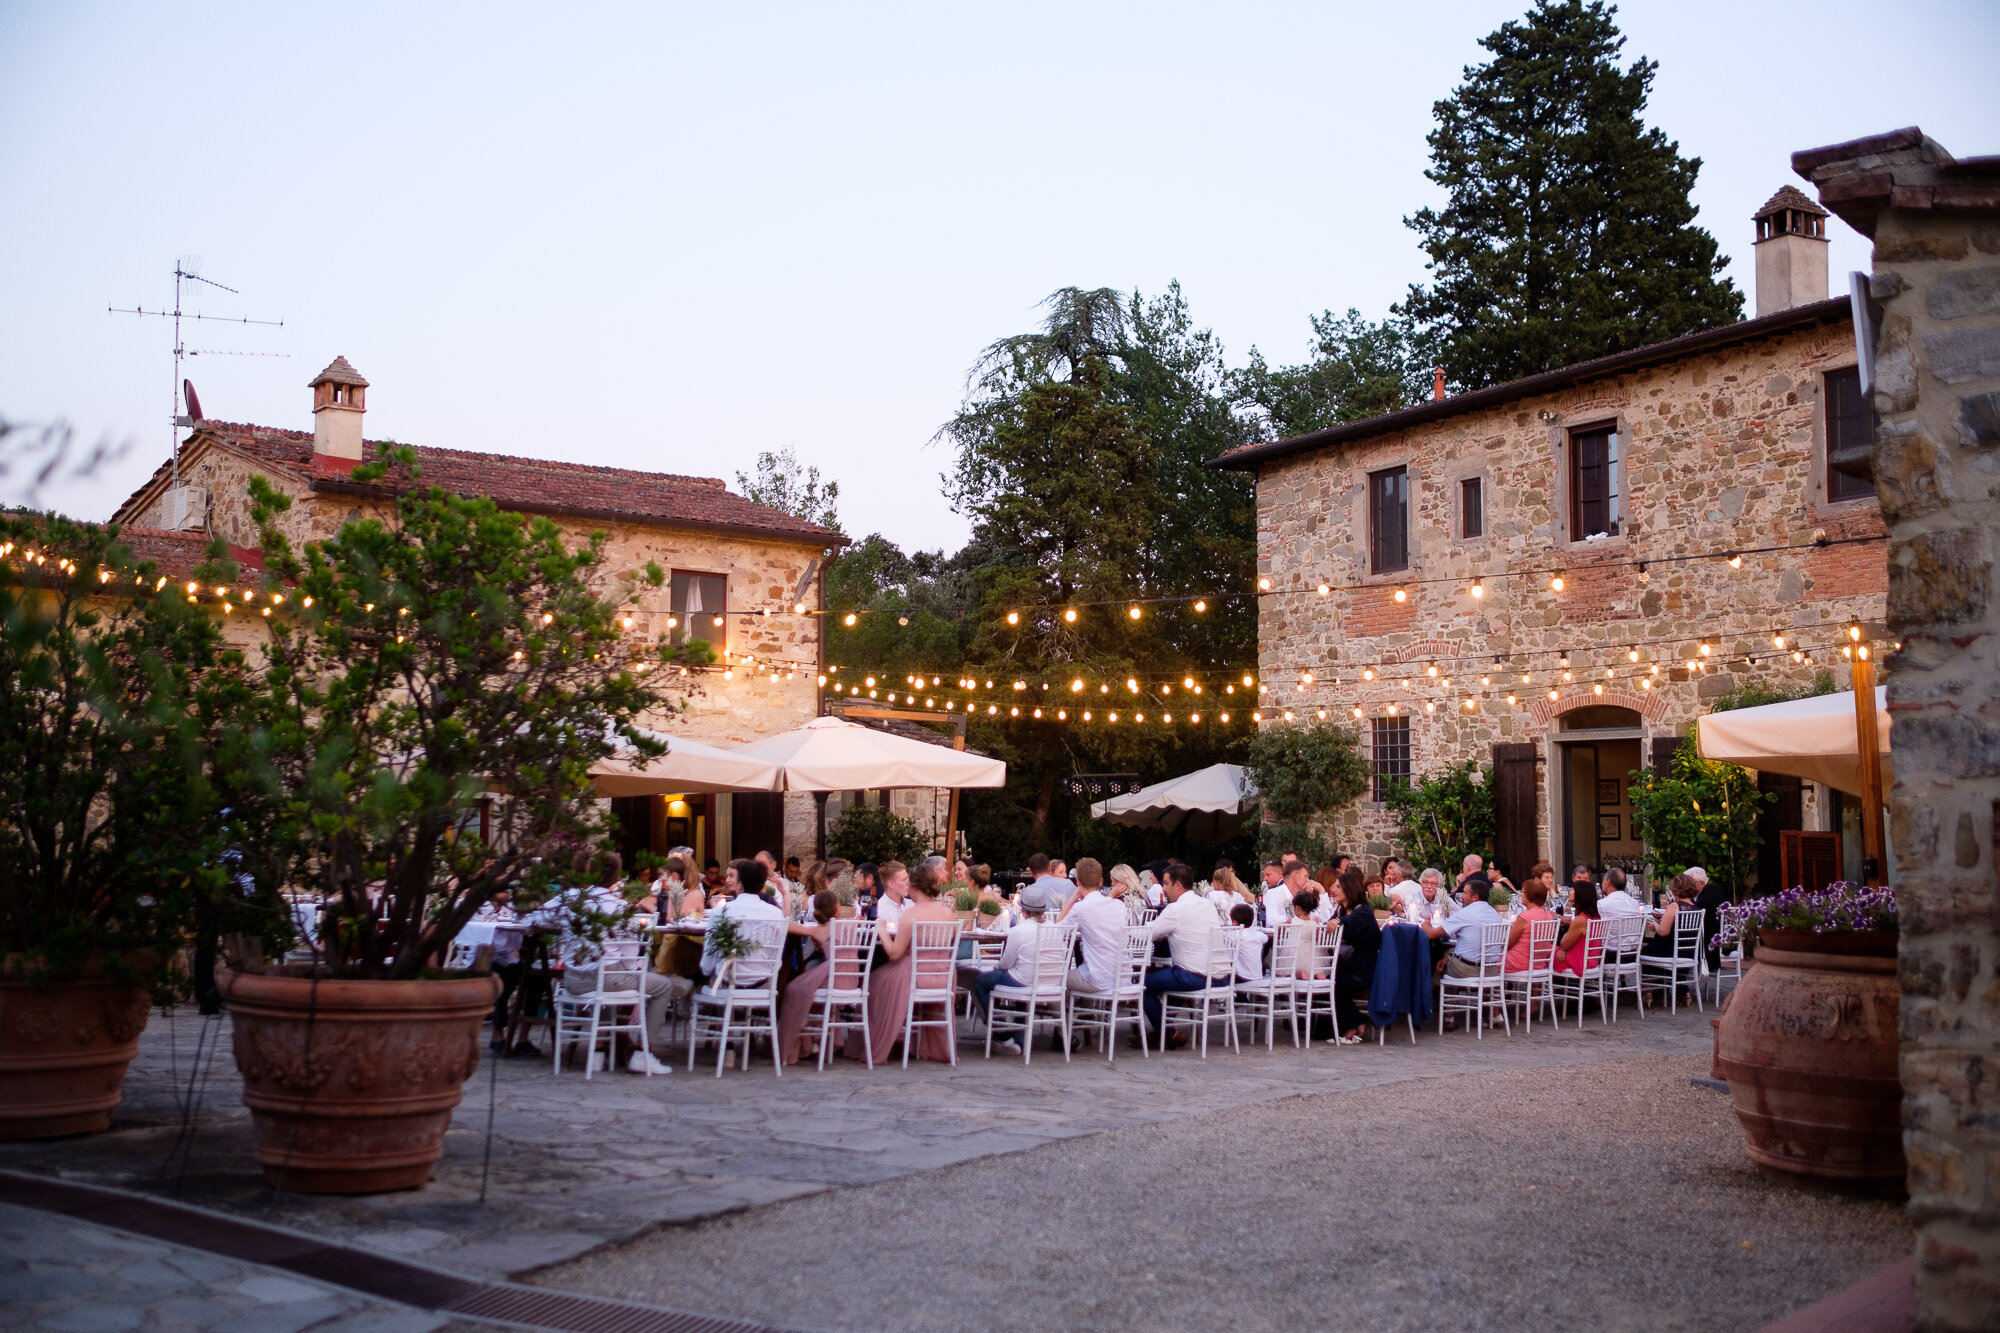  Wedding guests enjoy their dinner during Elena + Steve’s outdoor wedding reception at a villa in Tuscany, Italy by wedding photographer Scott Williams (www.scottwilliamsphotographer.com) 